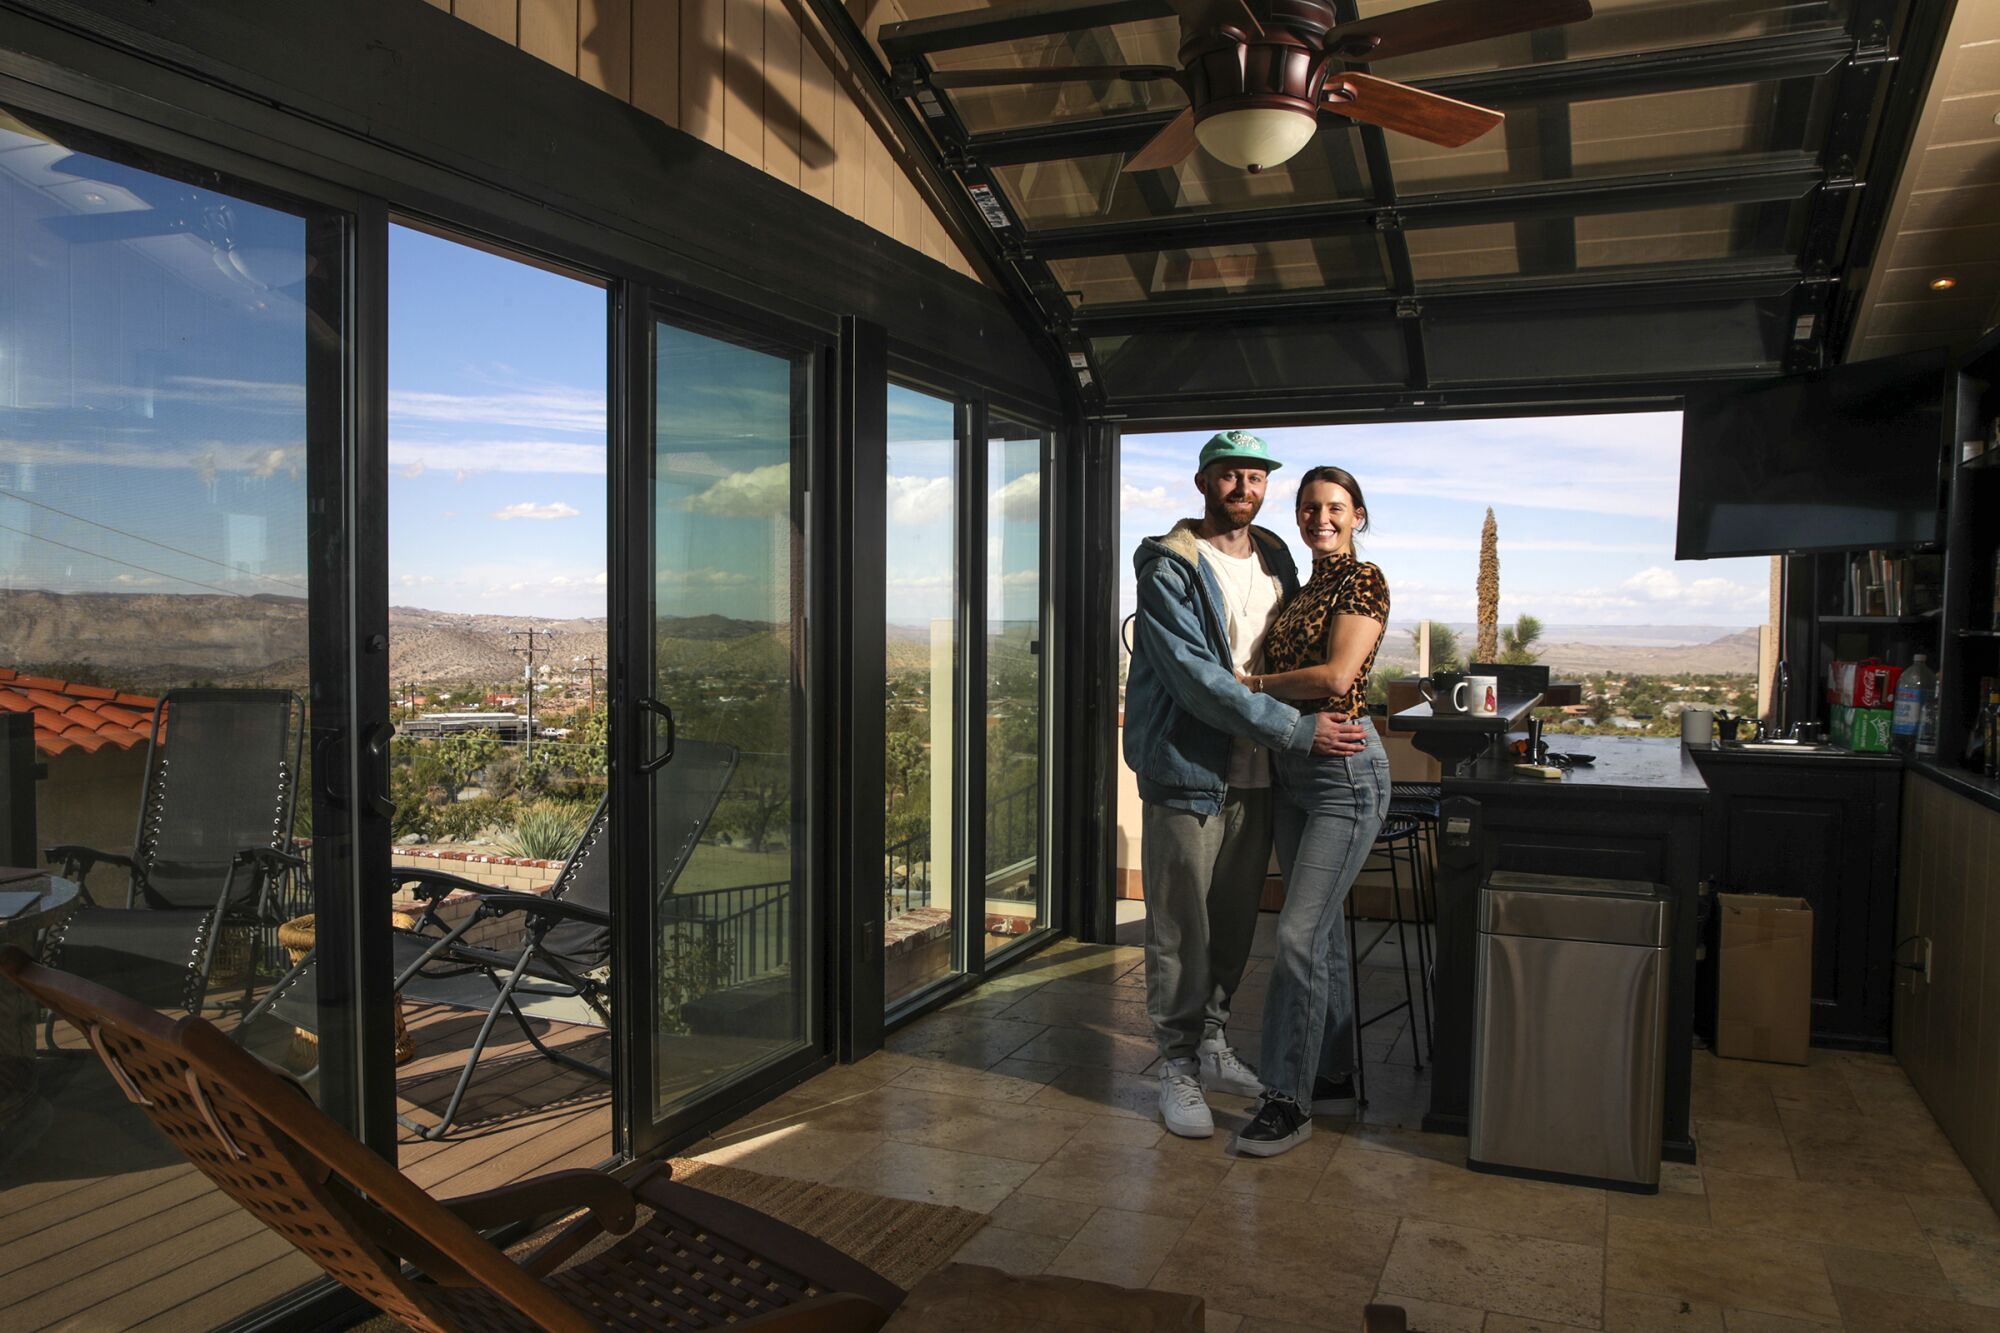 Tyler Gaul and Katelynn Rossiter left Los Angeles and found a spacious home in Yucca Valley during the pandemic.